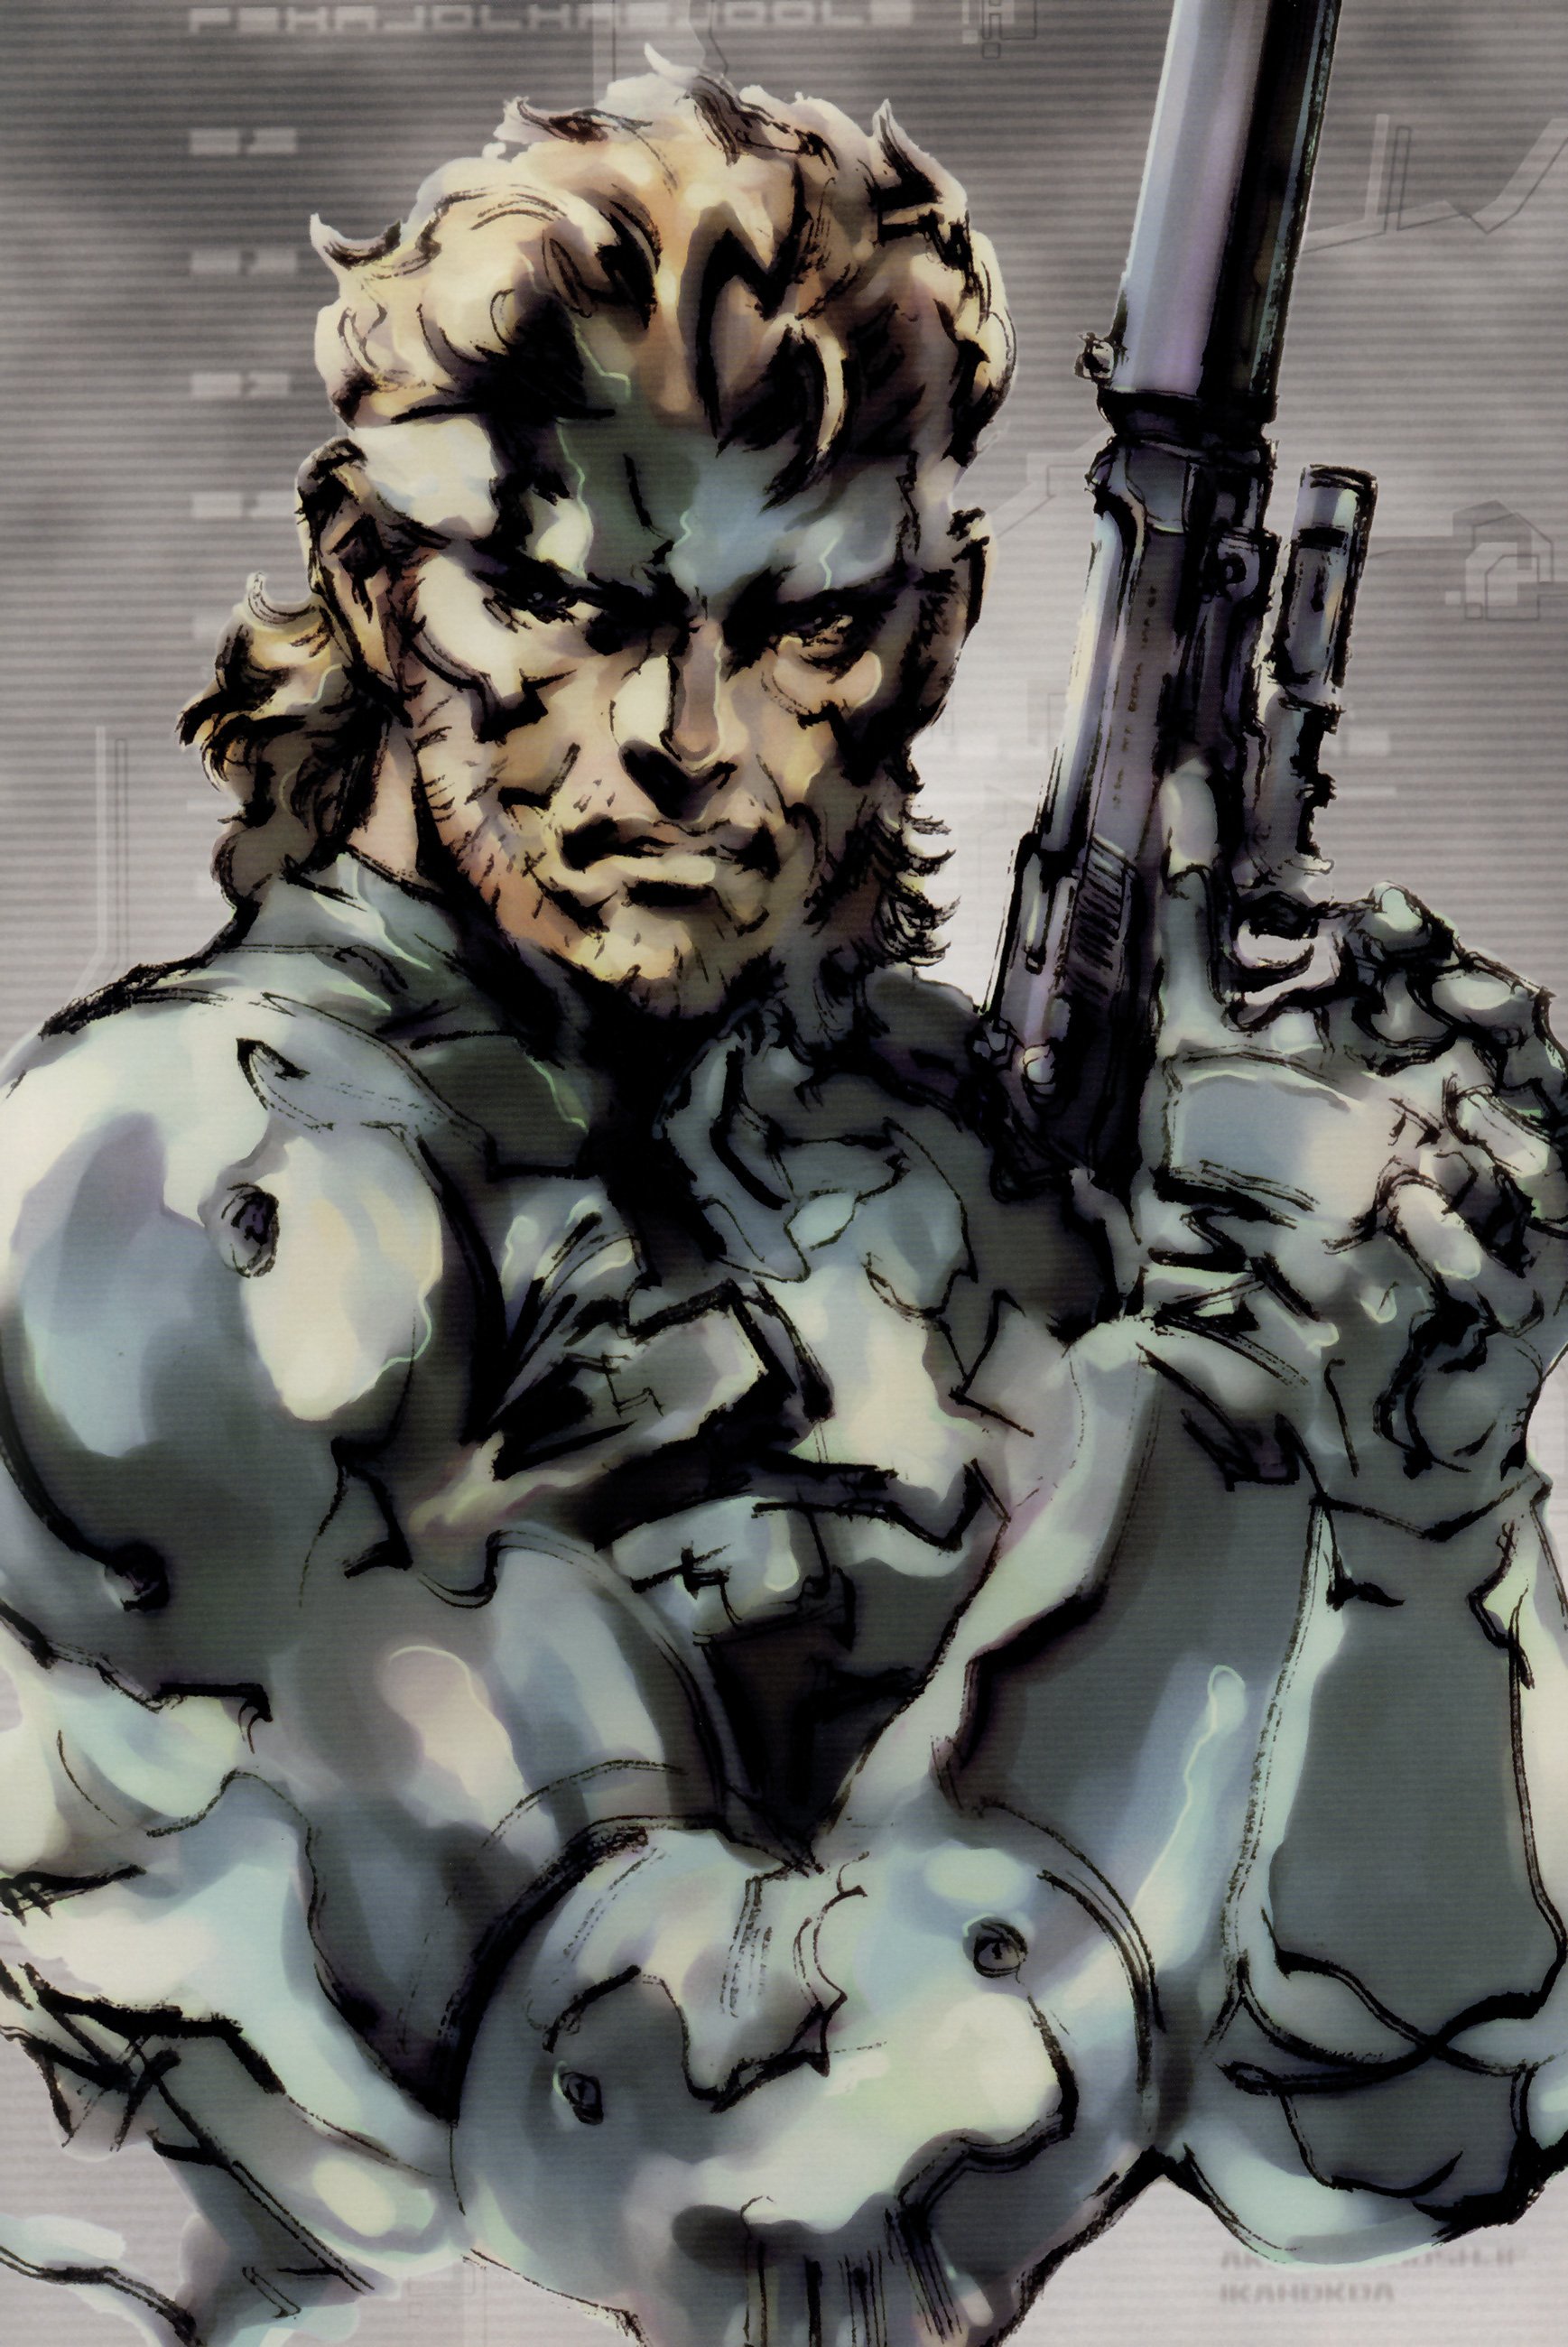 metal-gear-solid-solid-snake-wallpapers-hd-desktop-and-mobile-backgrounds